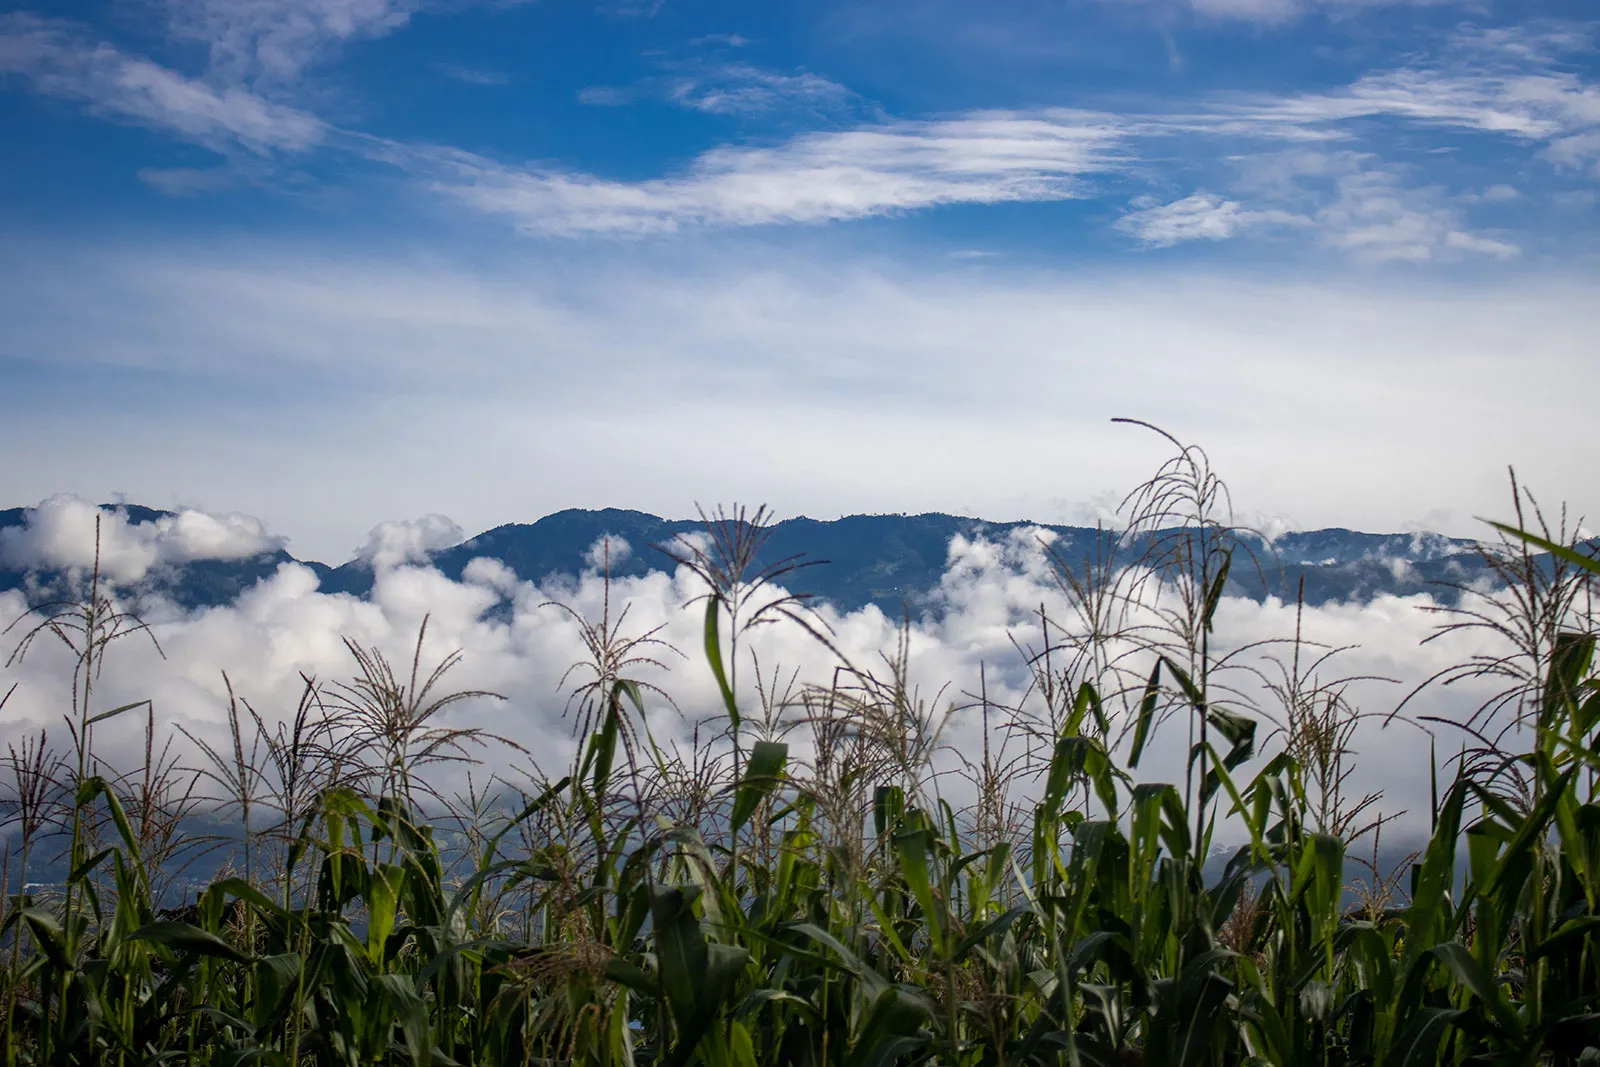 A landscape shot of a field of crops in front of a misty mountain covered by large white clouds.